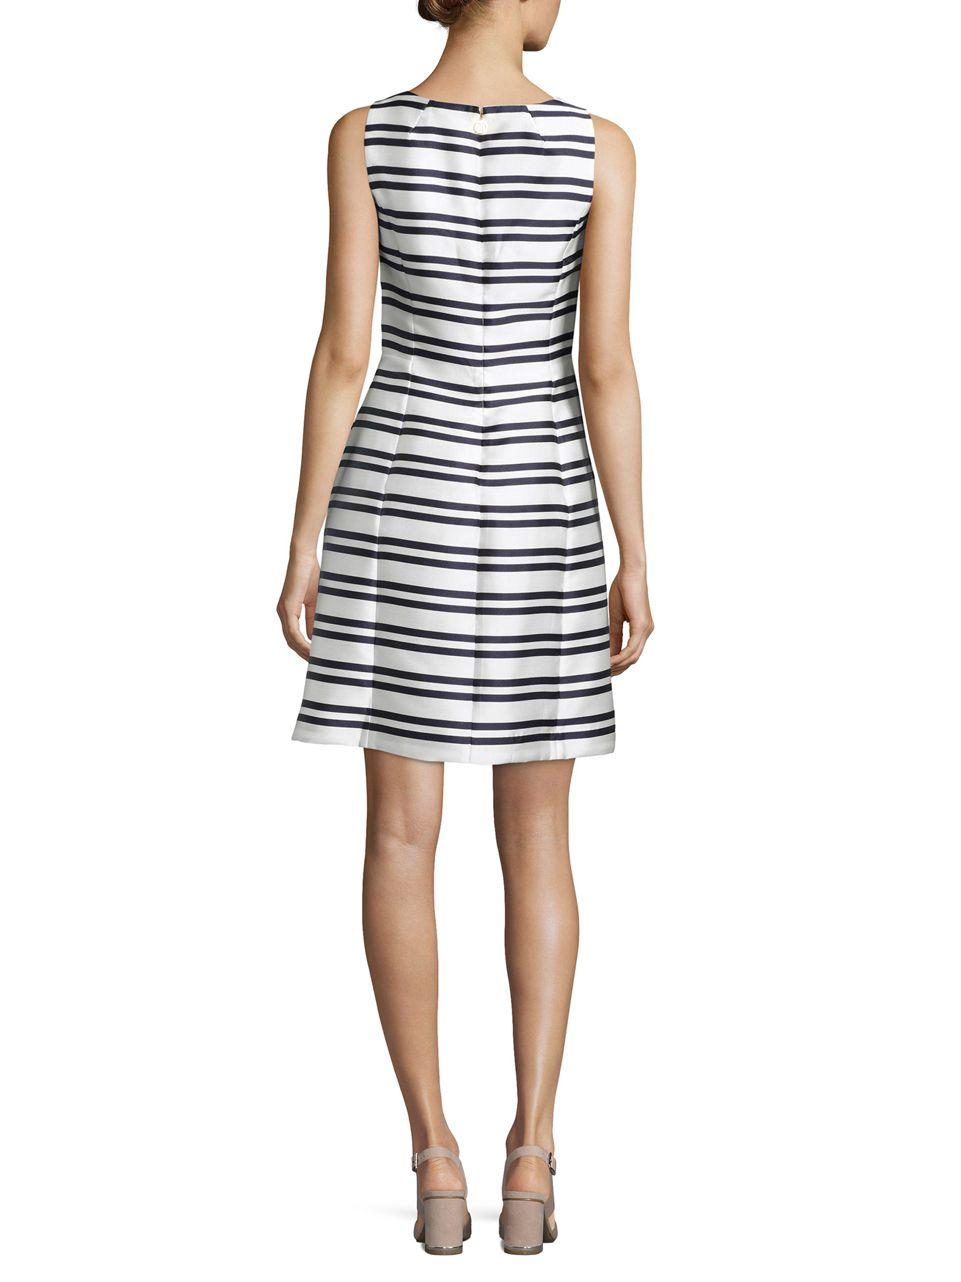 Lyst - Tommy Hilfiger Striped Fit-and-flare Dress in Blue